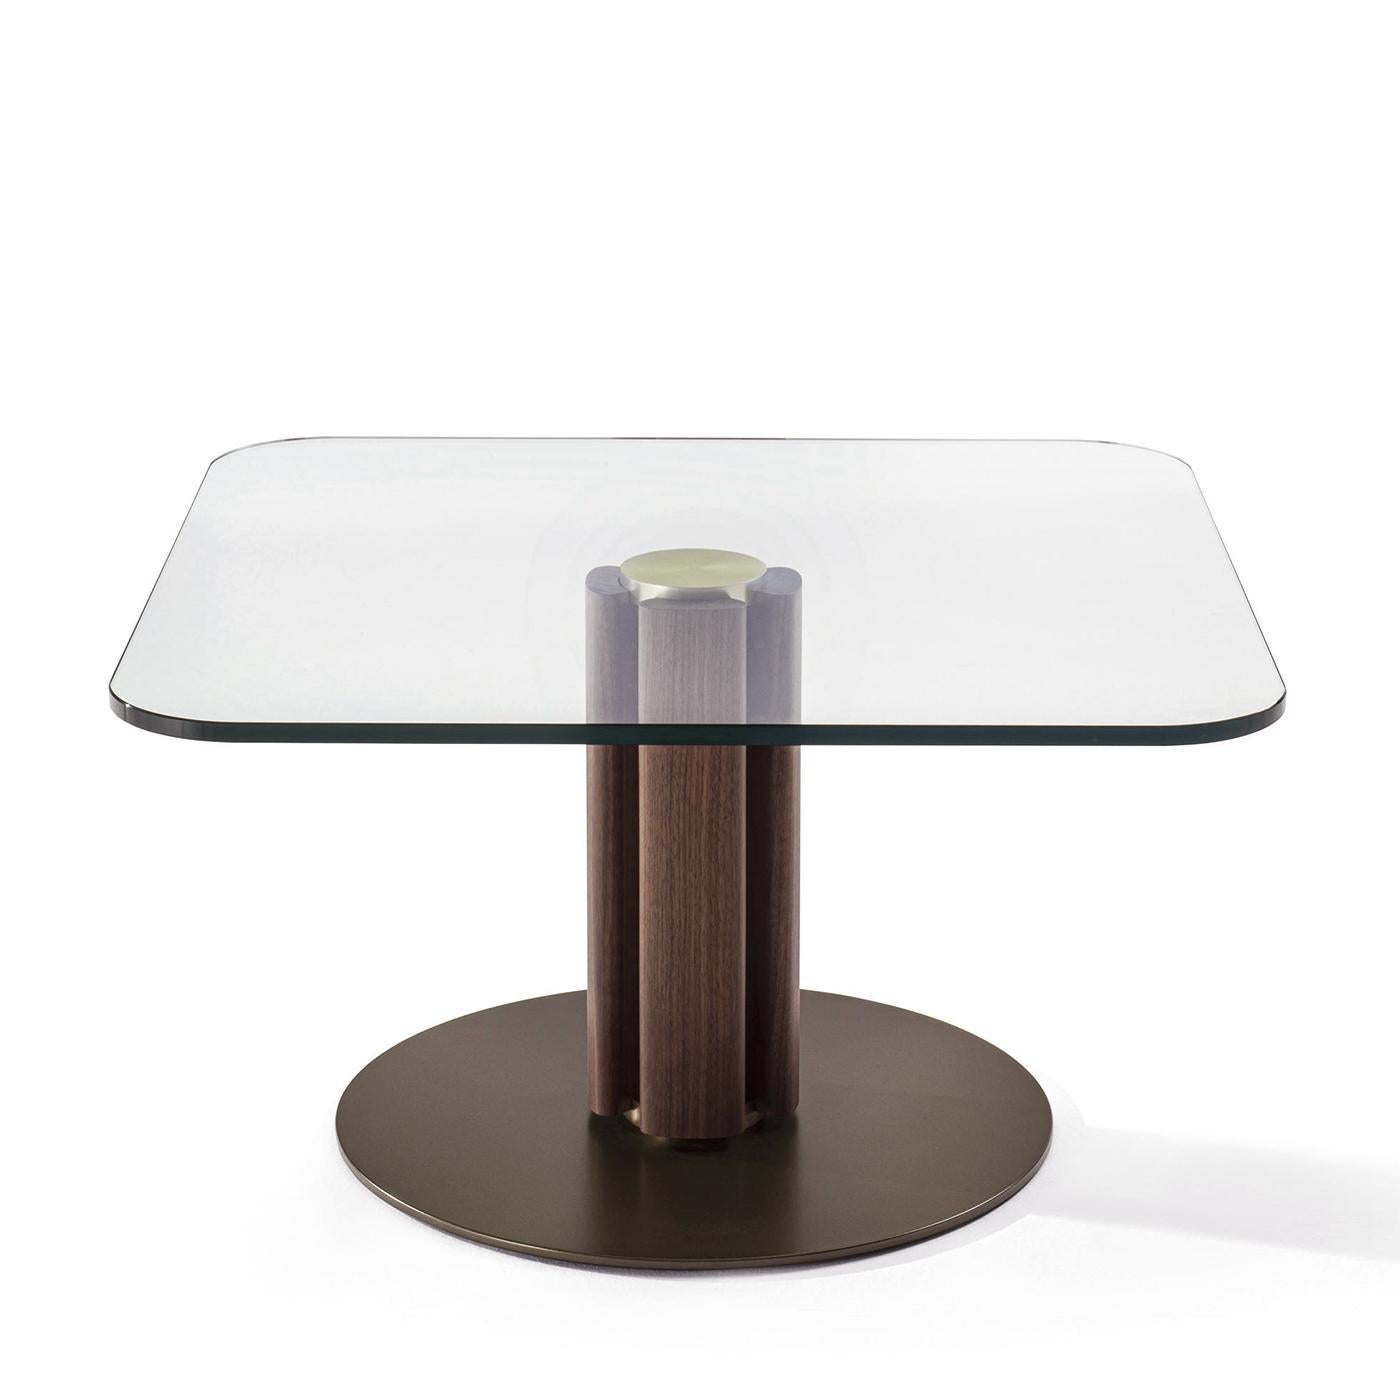 Side Table Mathilda with clear glass top, 15 mm thickness. 
With central pole made with solid walnut wood
with solid brass central pole in brushed finish.
With round metal base in bronze oro finish, 
round base diameter: 55cm.
L120xD120xH45cm,